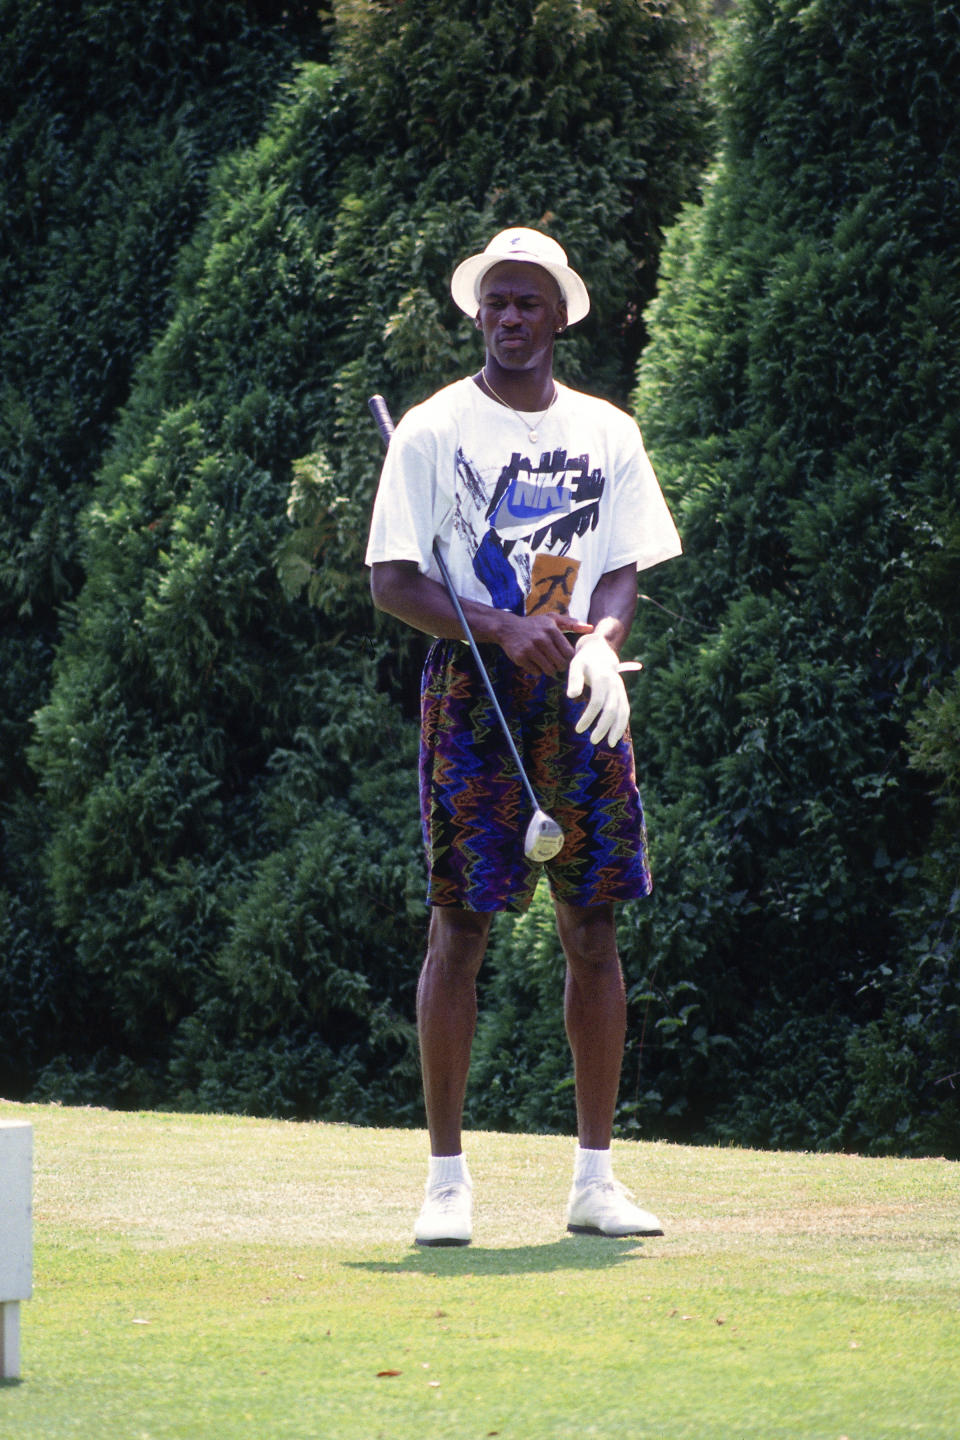 Michael Jordan plays golf in Barcelona, Spain during the 1992 Summer Olympics. (Photo by Andrew D. Bernstein/NBAE via Getty Images)